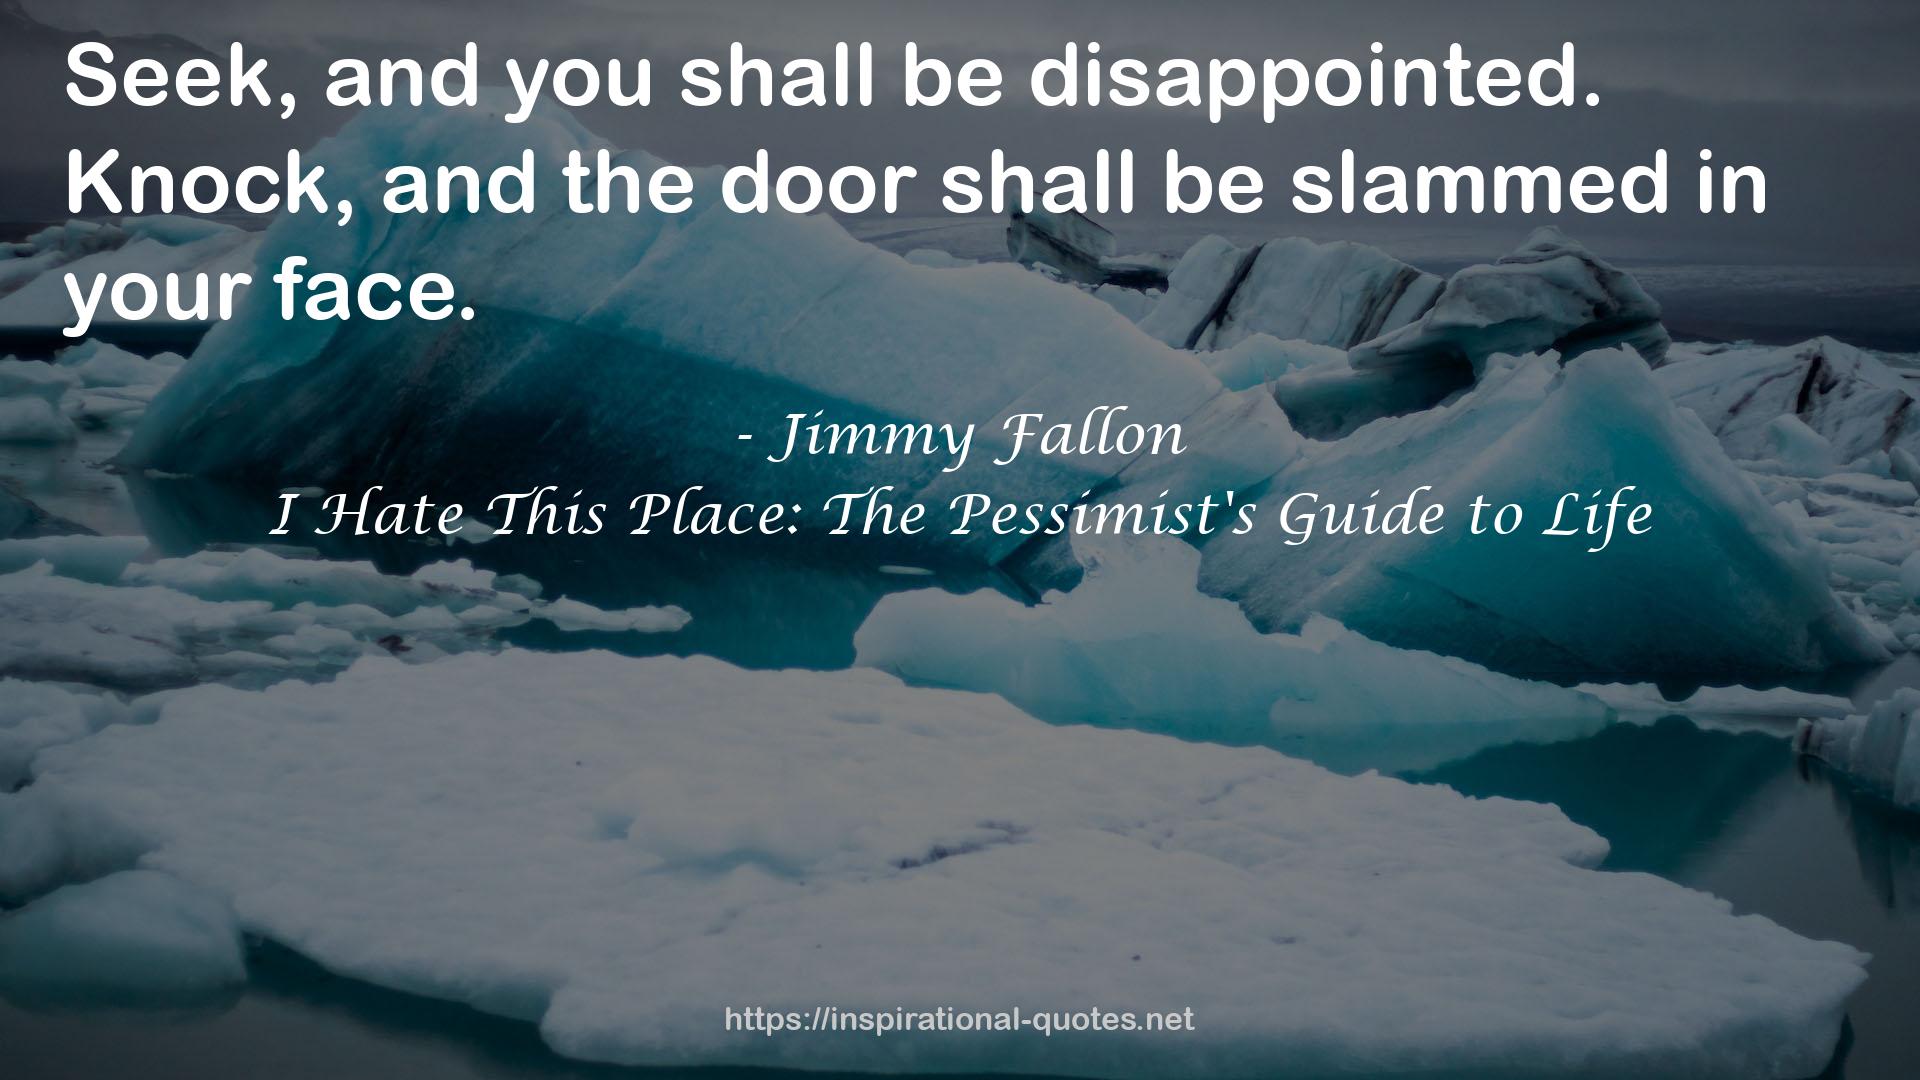 I Hate This Place: The Pessimist's Guide to Life QUOTES